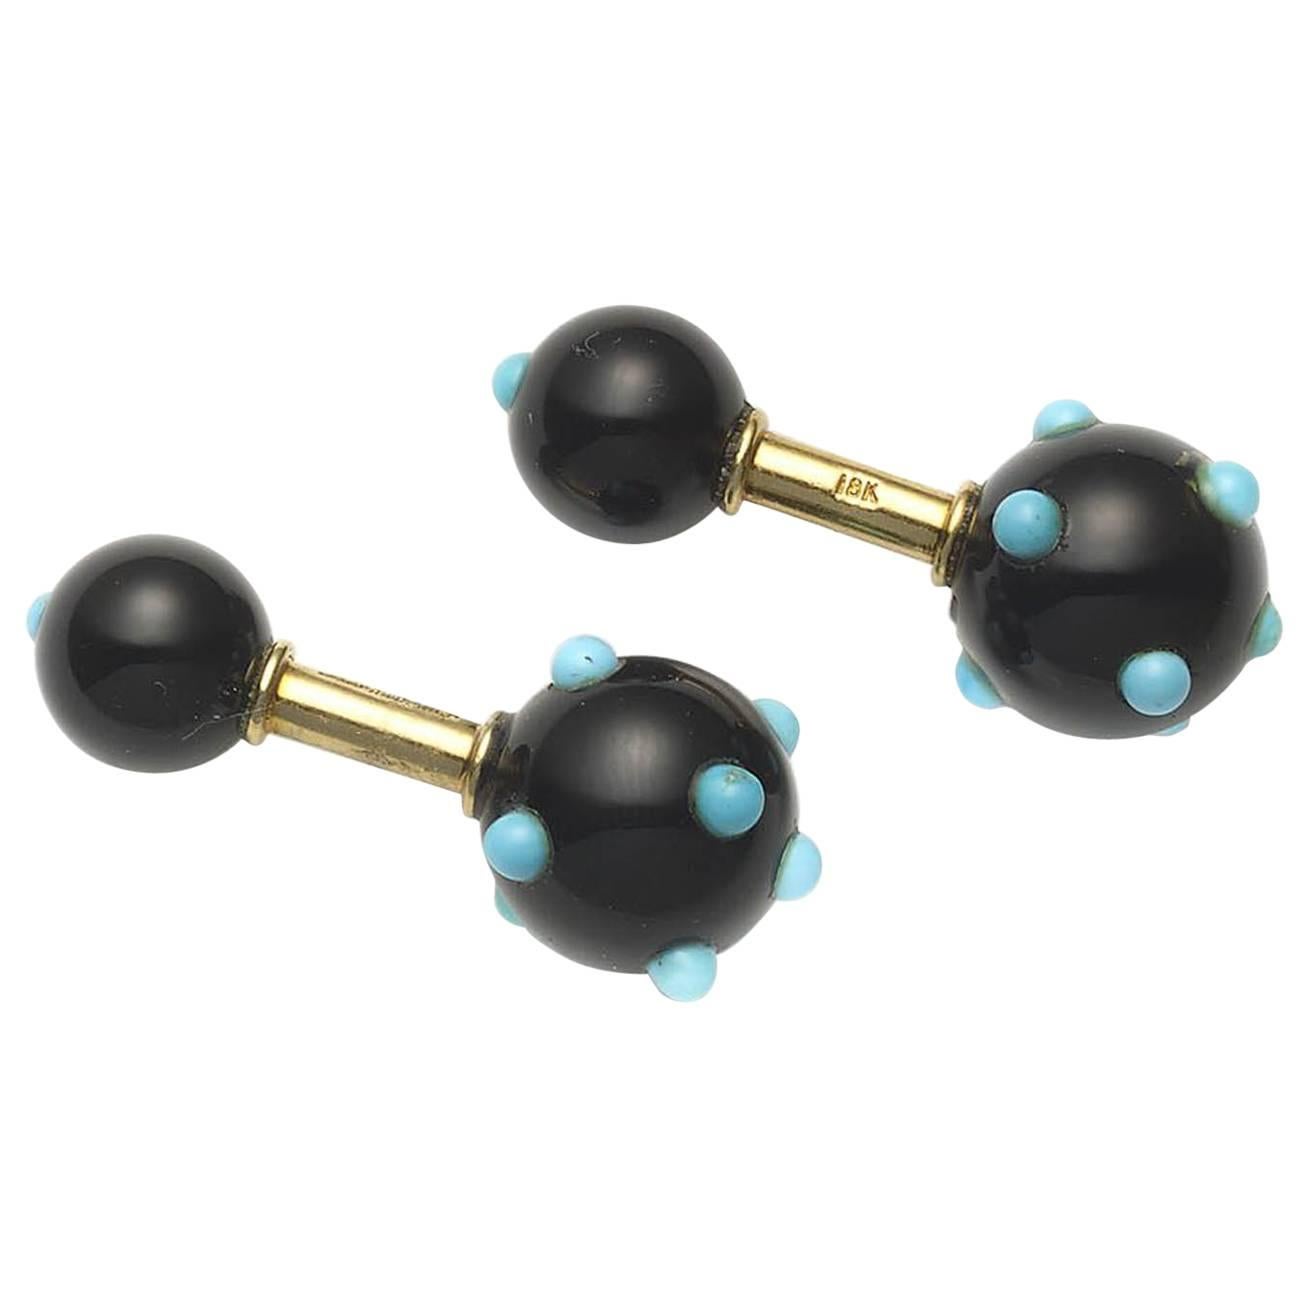 Jean Schlumberger for Tiffany & Co. Black Onyx & Turquoise Cufflinks